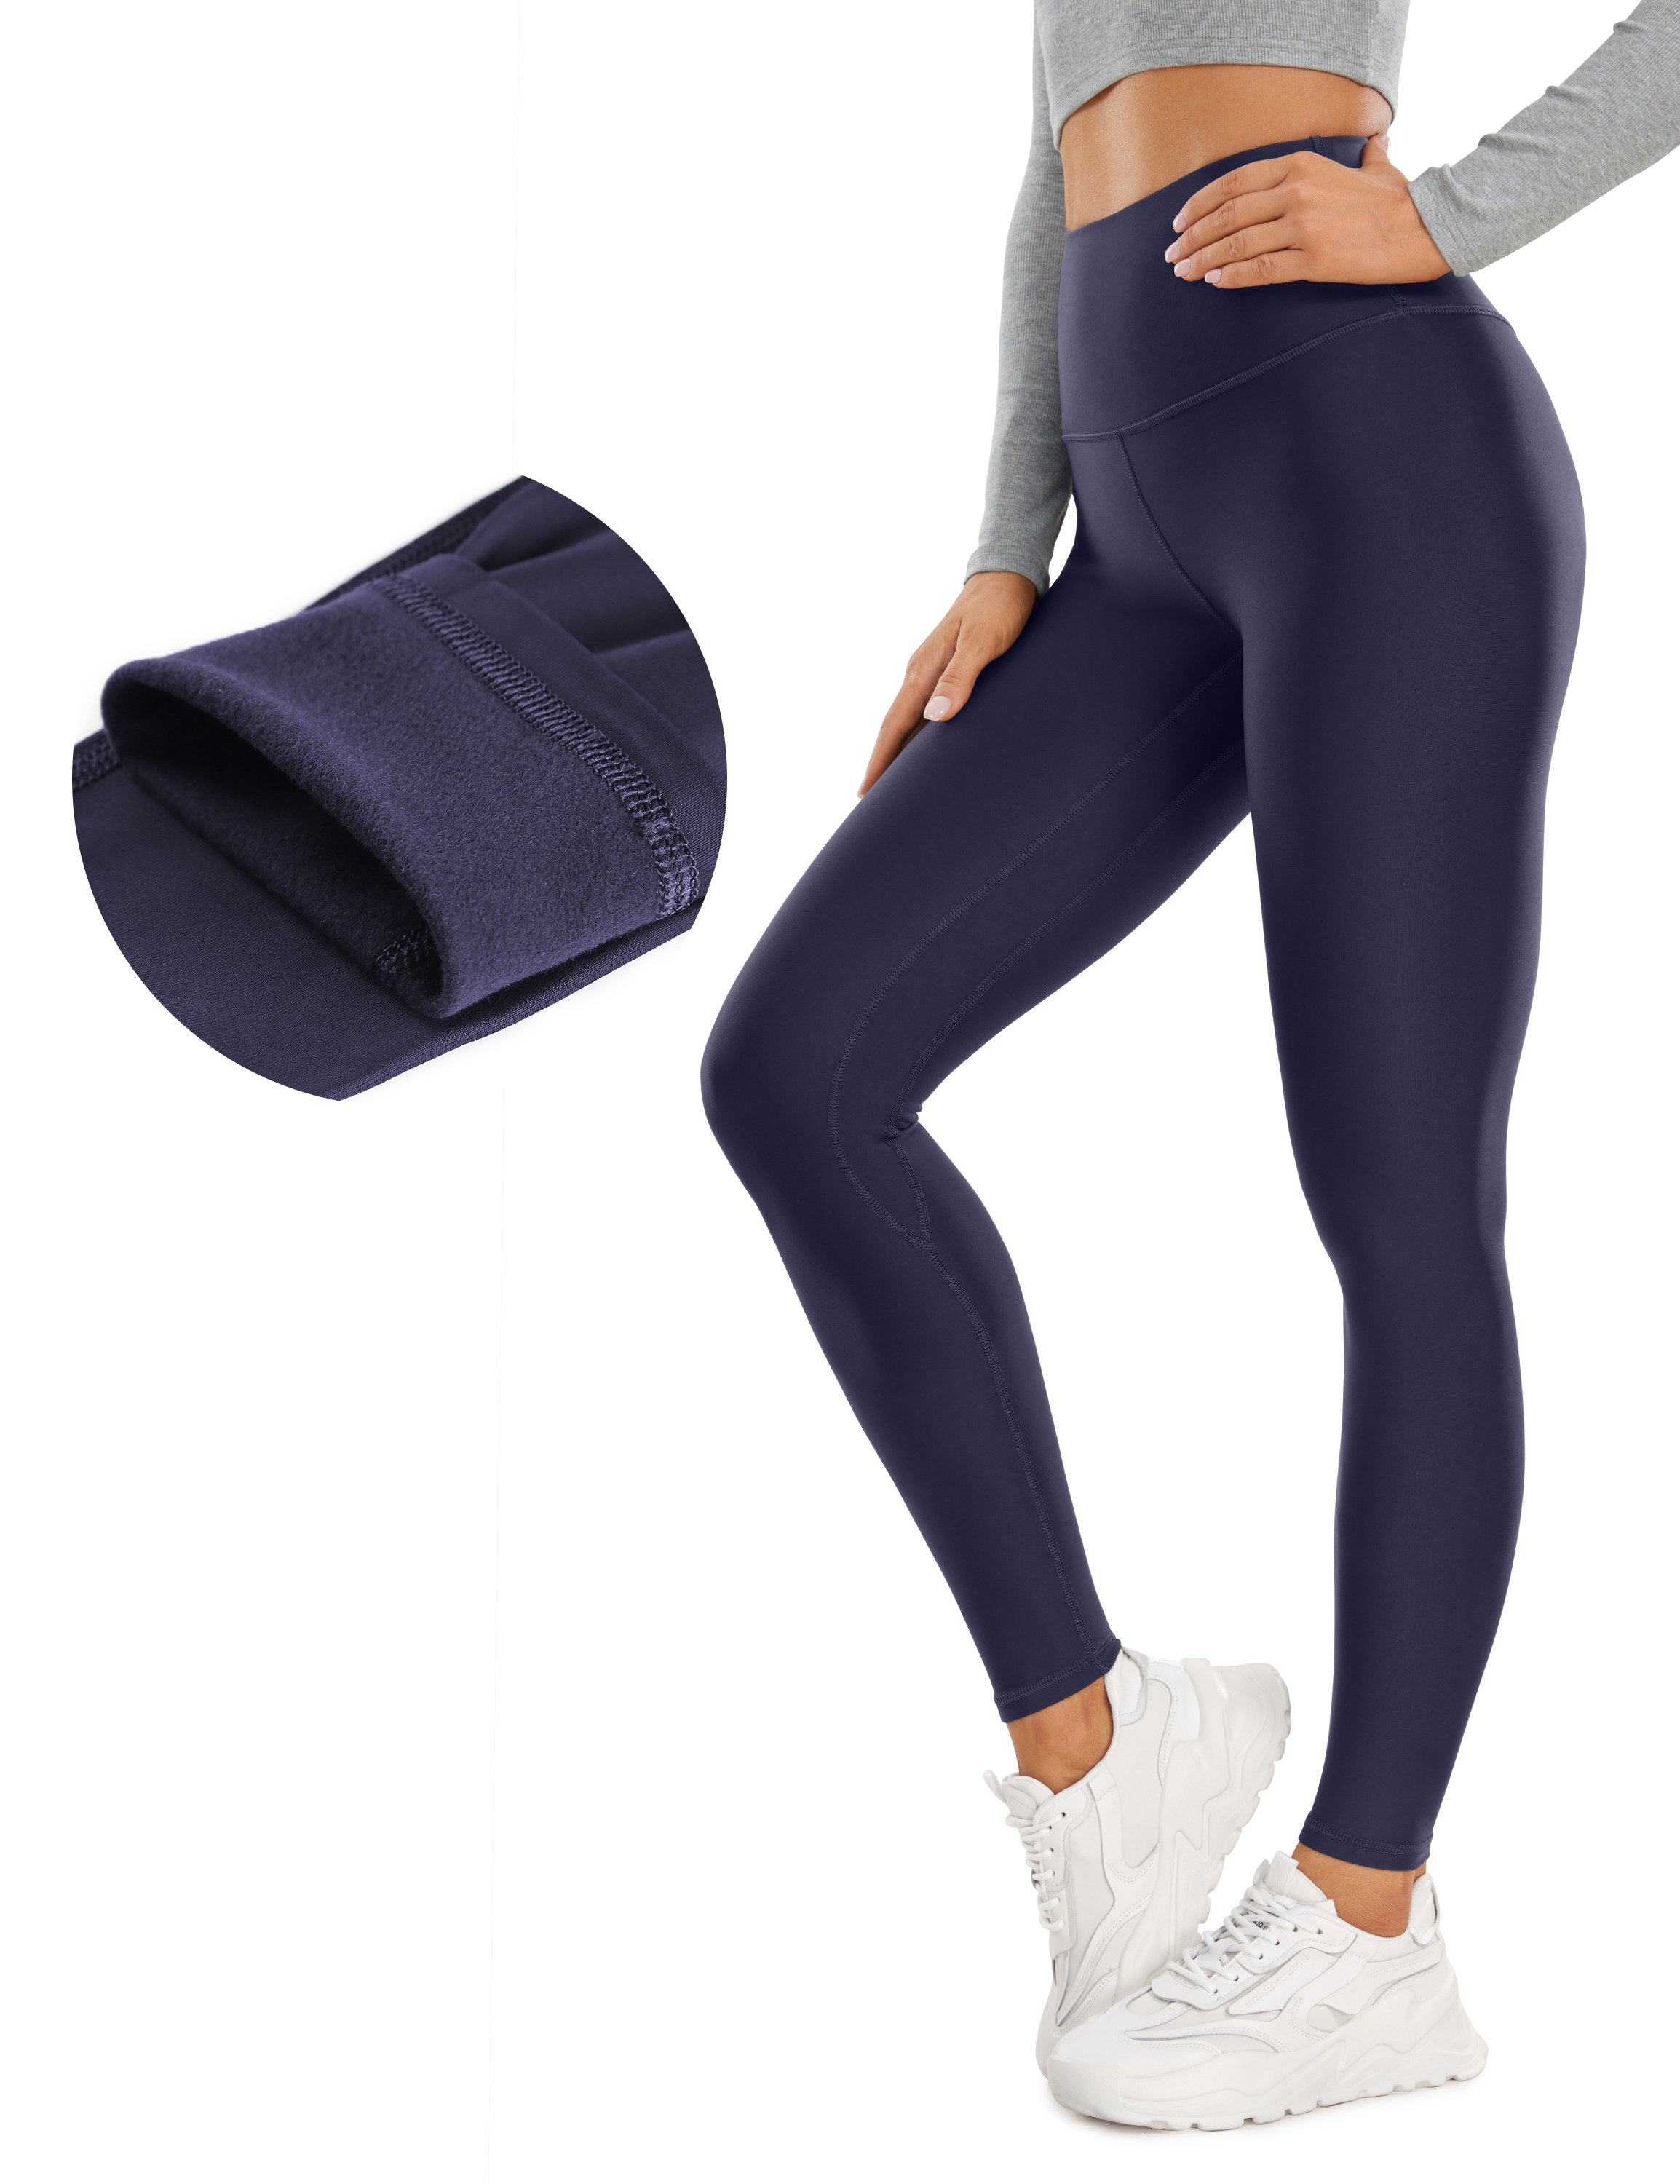 CRZ YOGA Fleece Lined Leggings Winter Warm Workout Pants 28 inches Full  Length